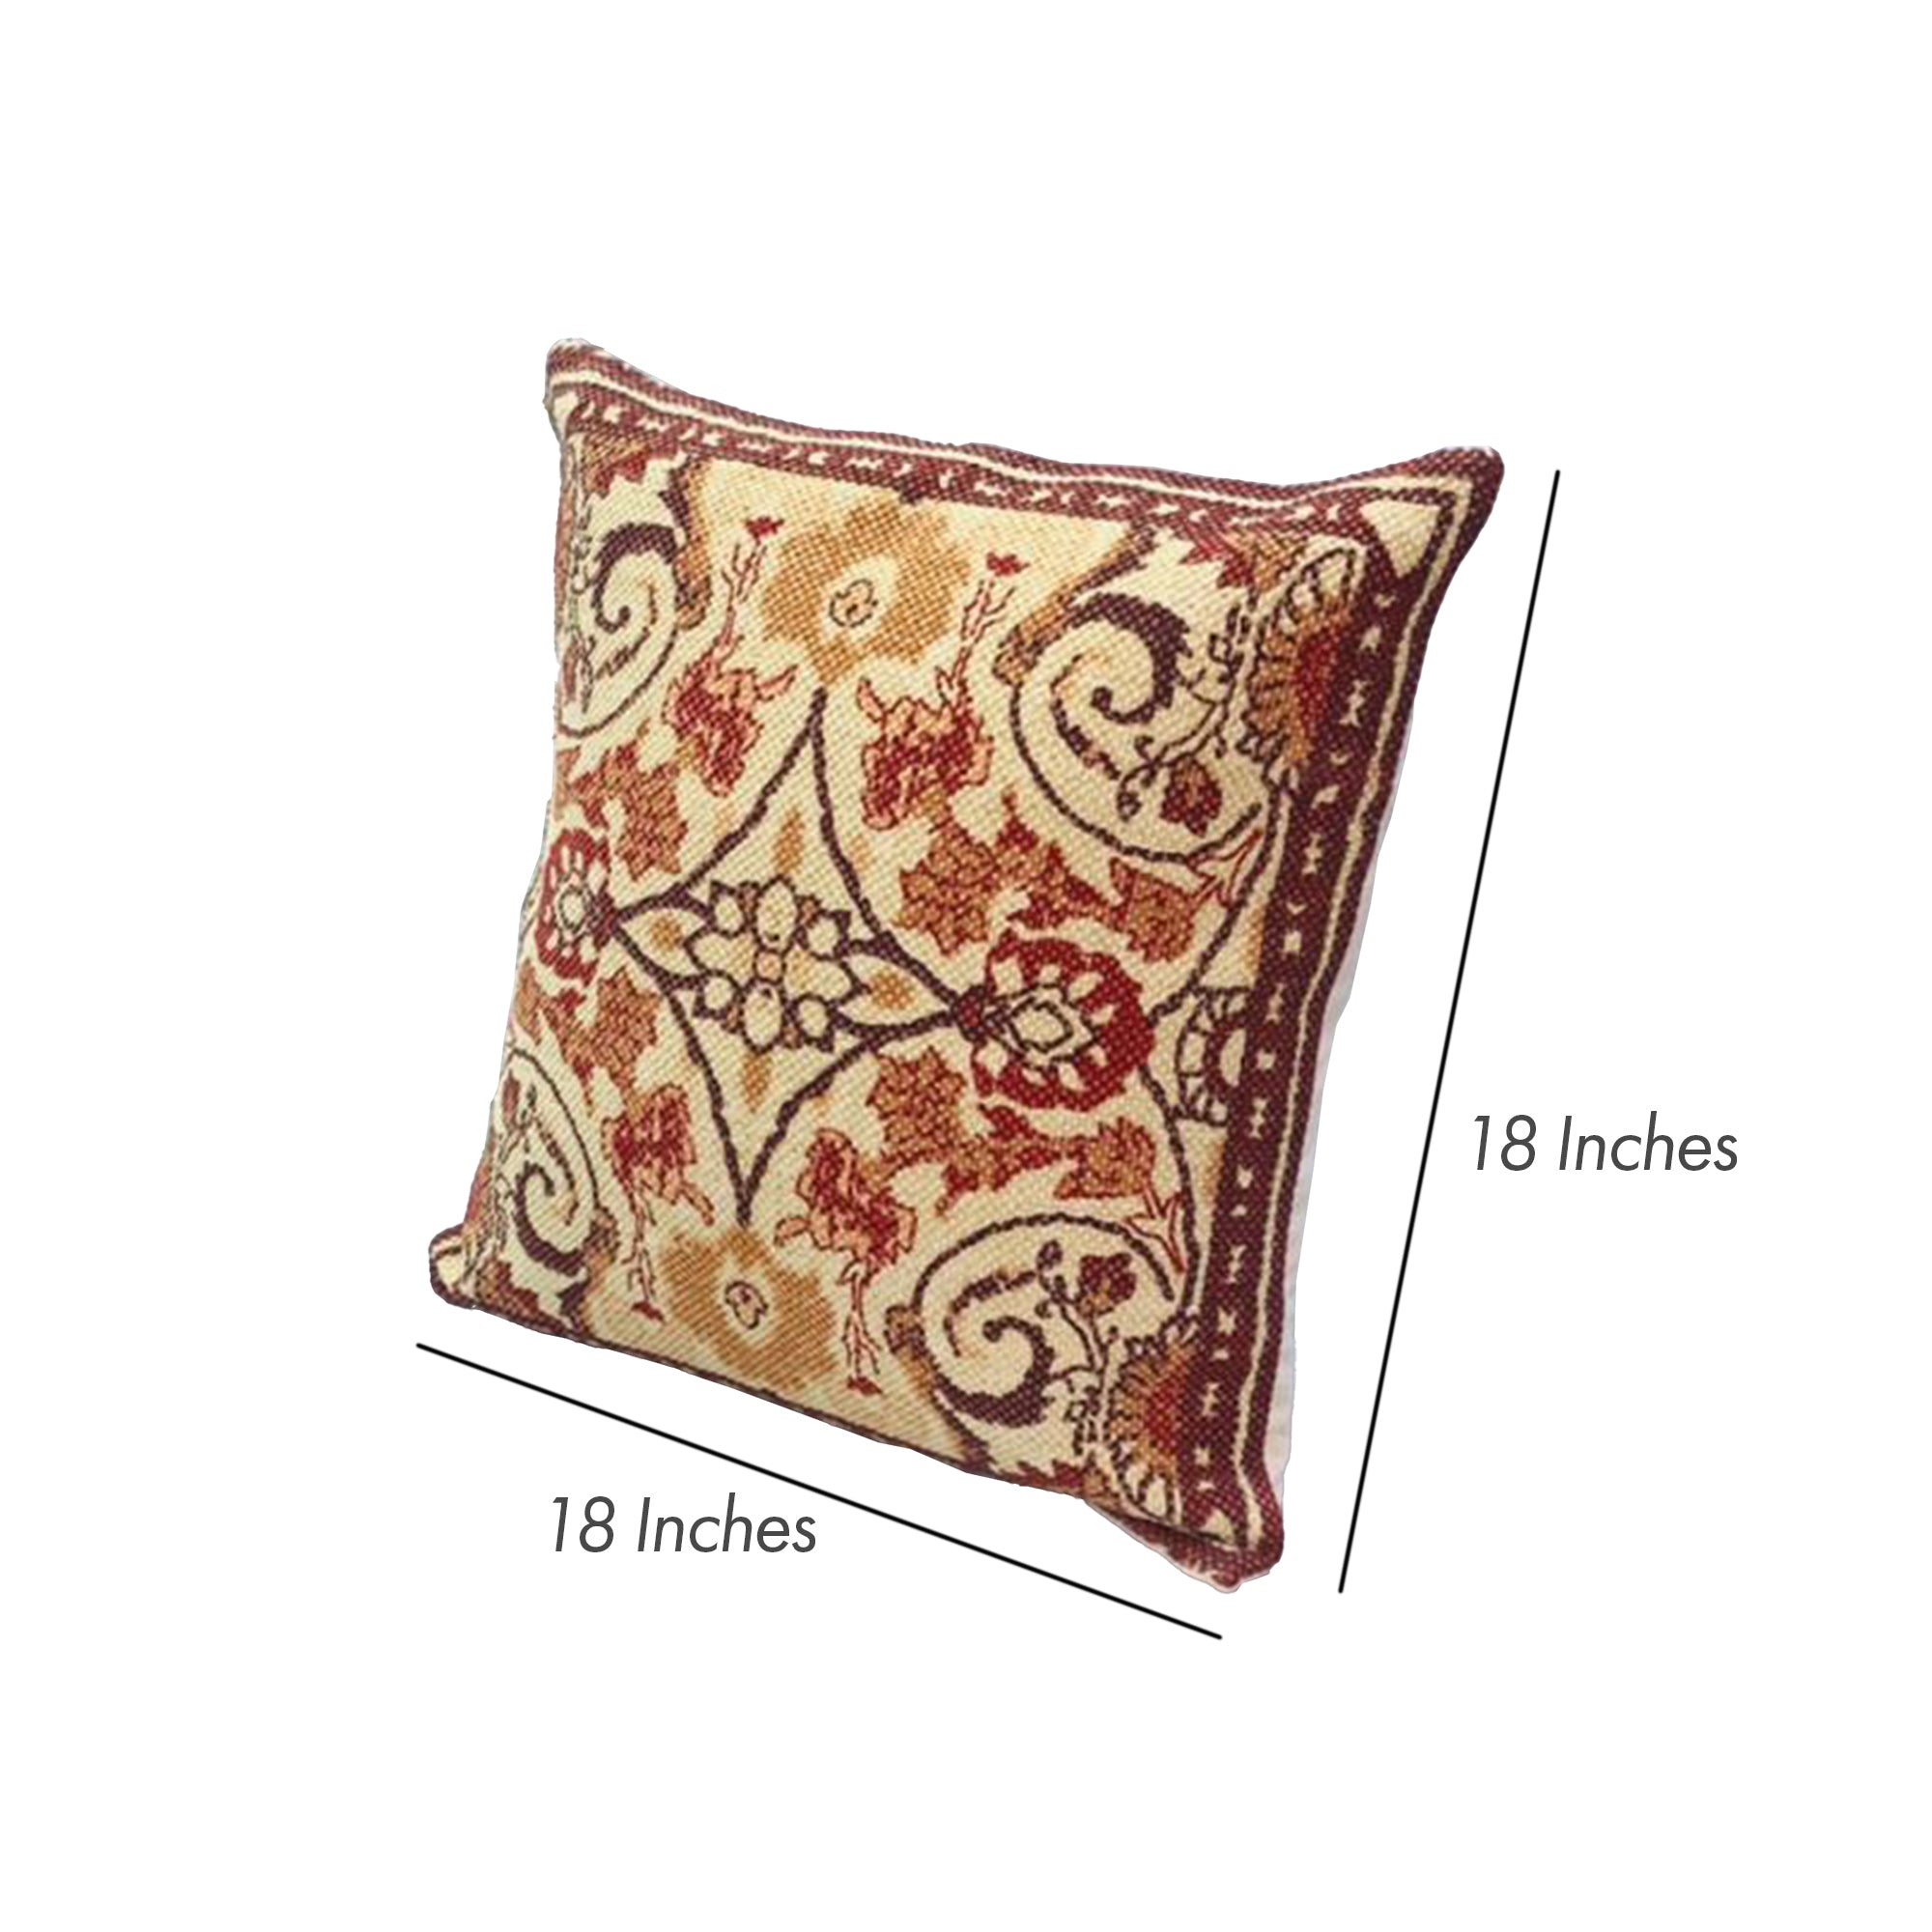 18 x 18 Square Cotton Accent Throw Pillow, Scrolled Floral Pattern, Multicolor